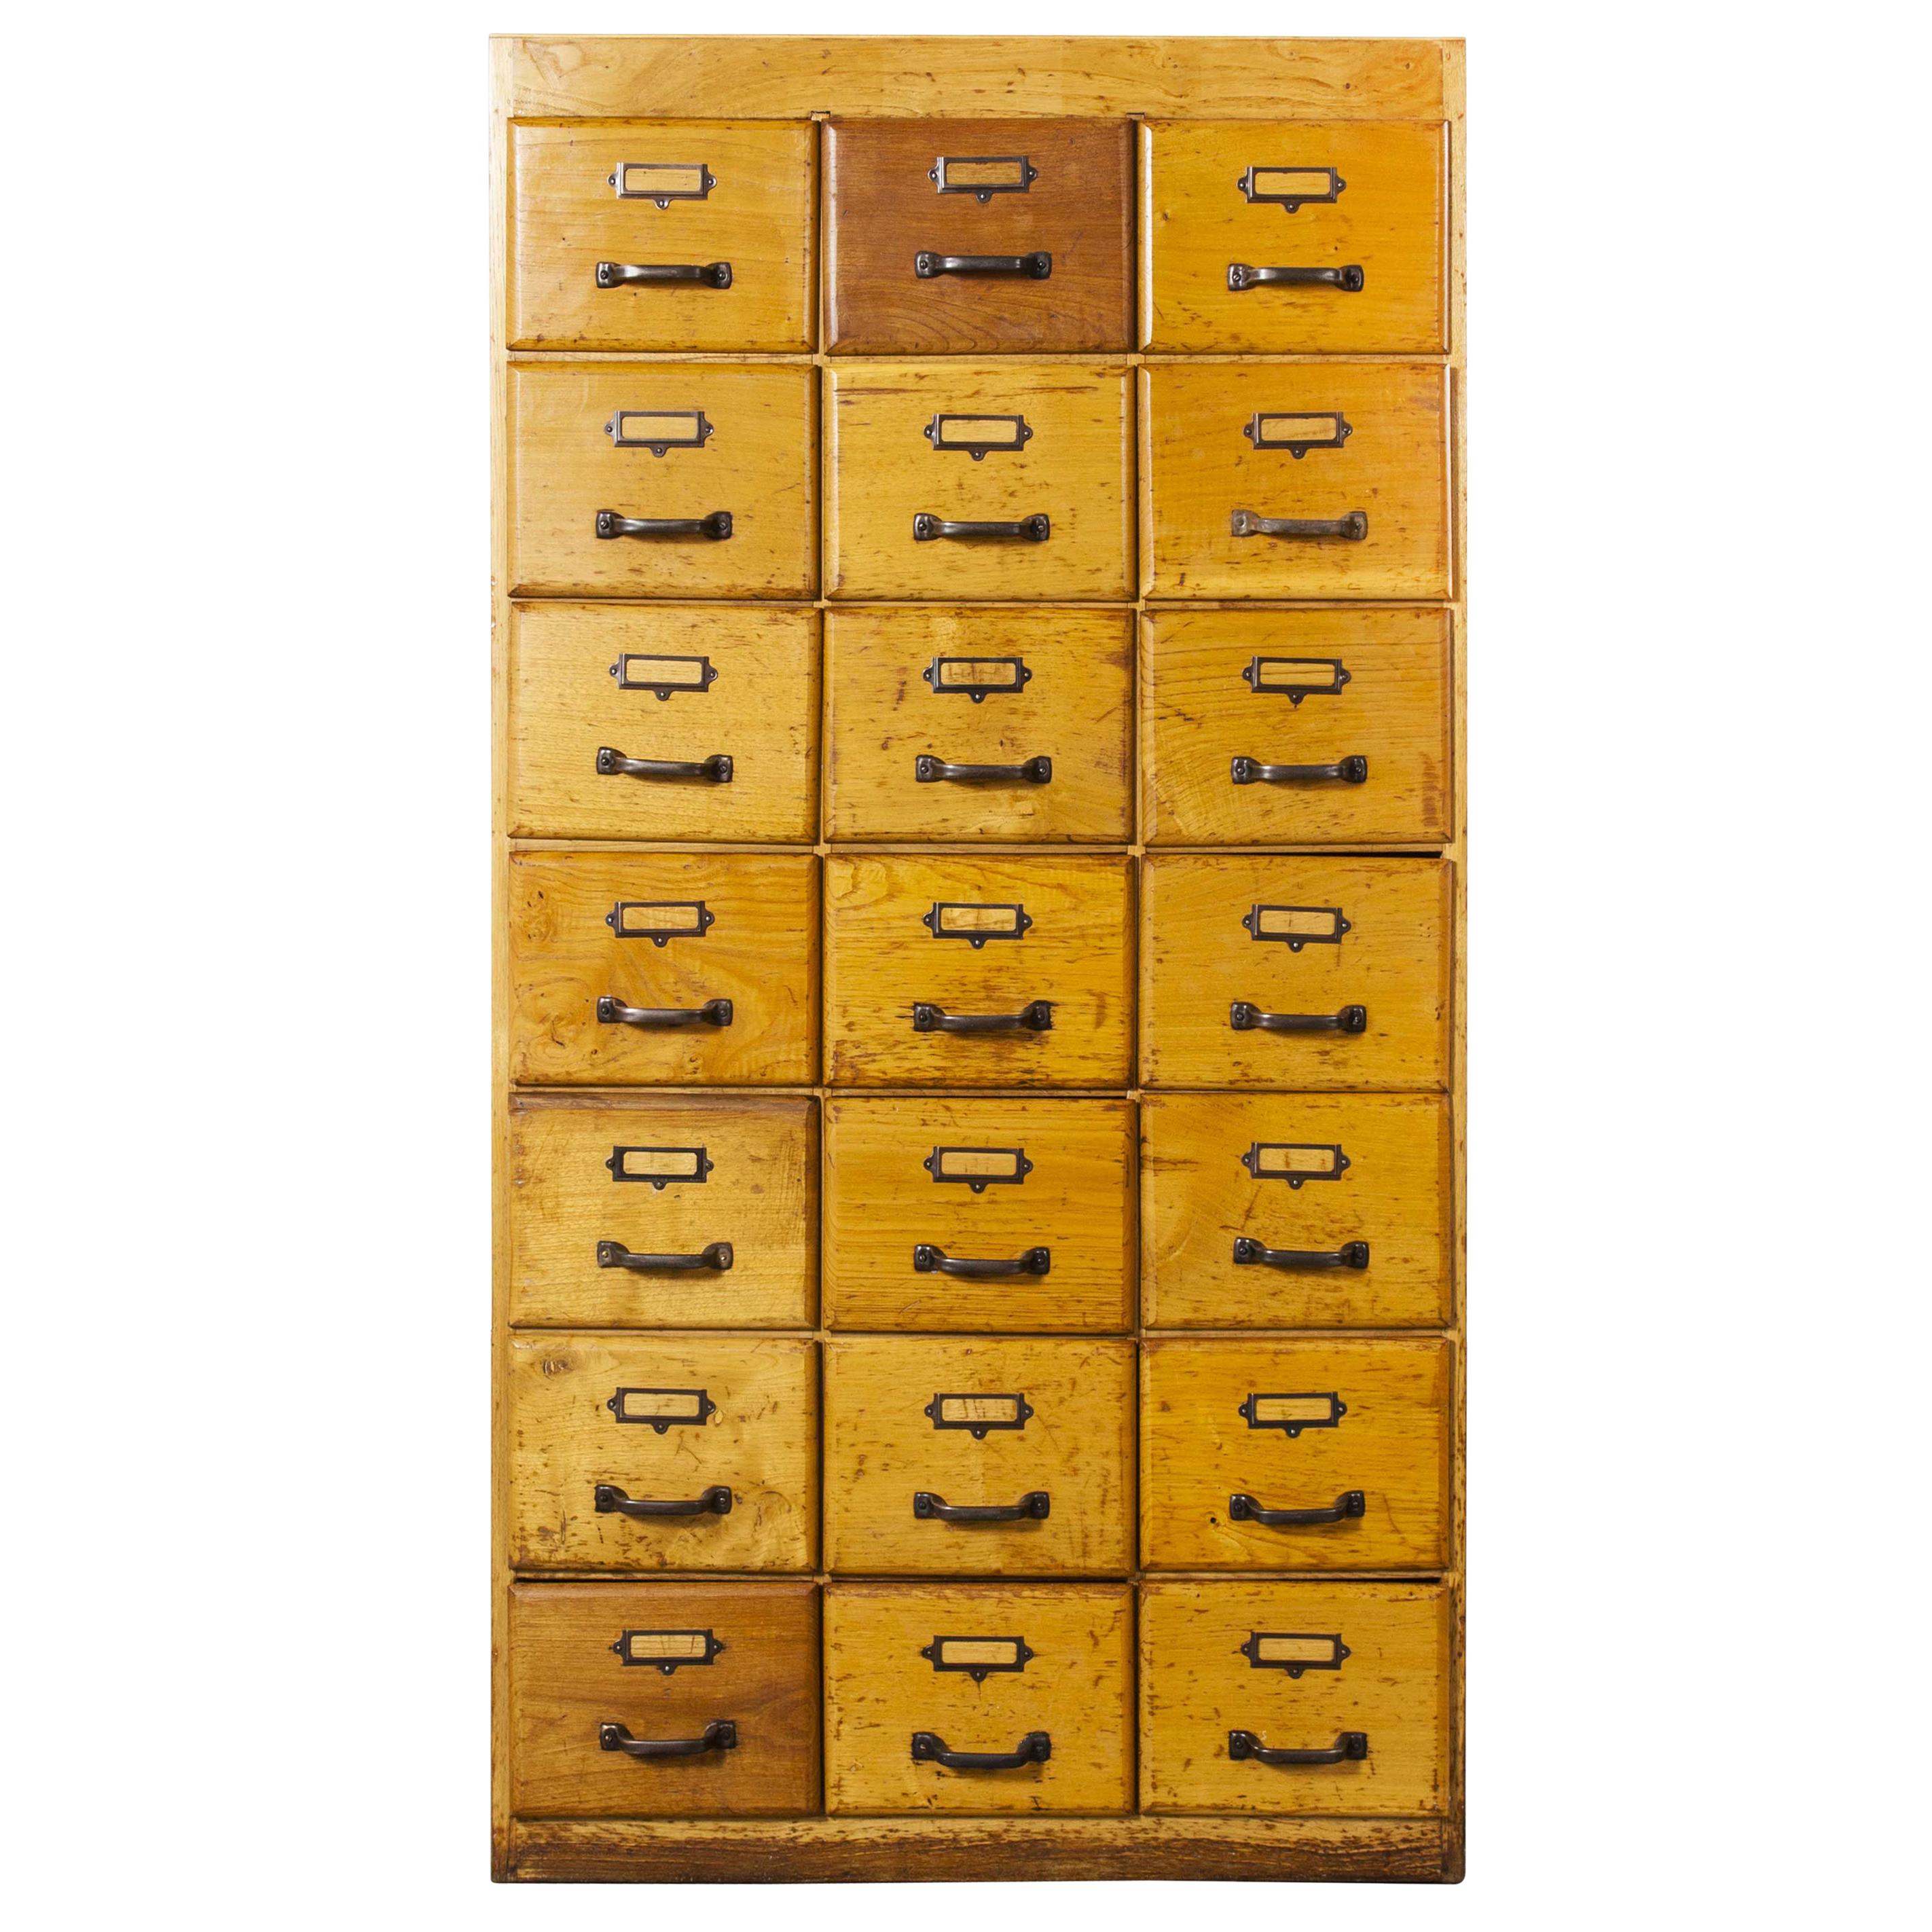 1950s English Oak Tall Multi Drawer Chest of Drawers, Twenty One Drawers For Sale